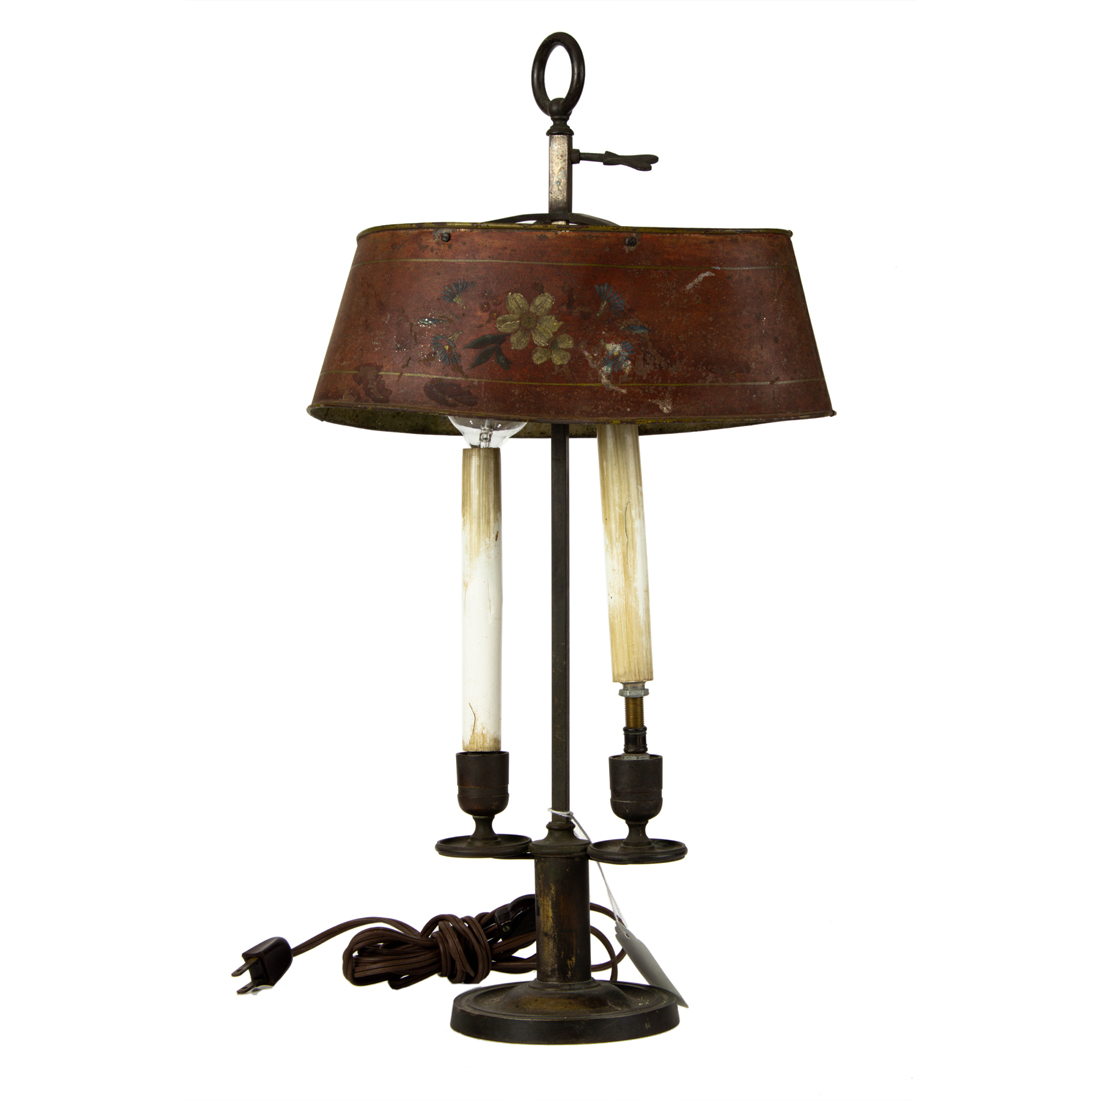 FRENCH BRONZE BOILLOTE LAMP WITH